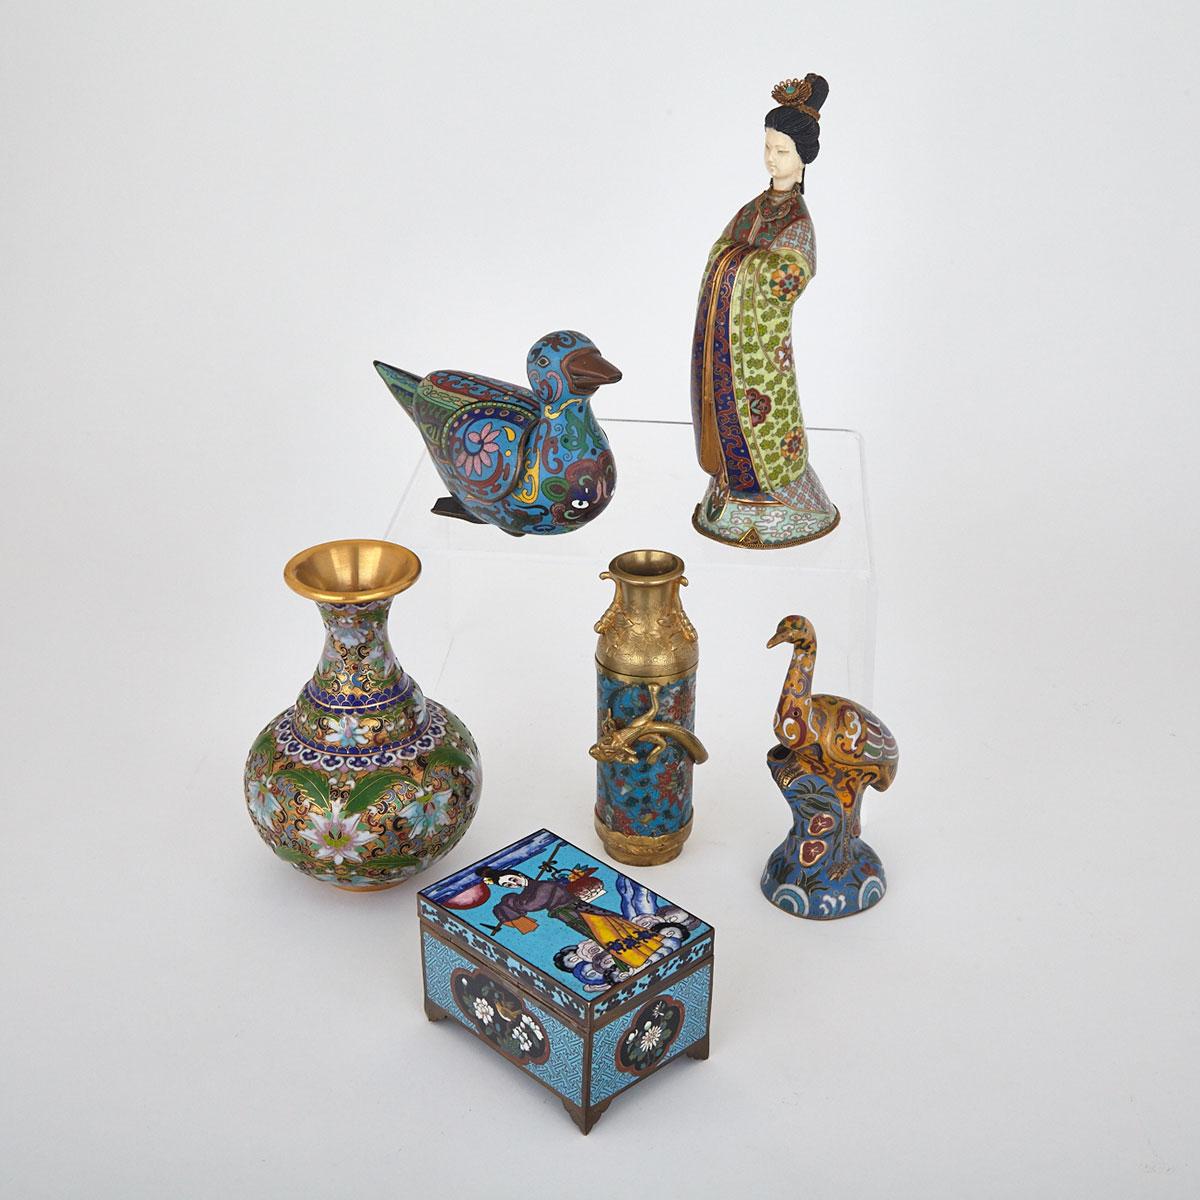 Group of Six Cloisonne Enamel Wares, China, Mid-20th Century